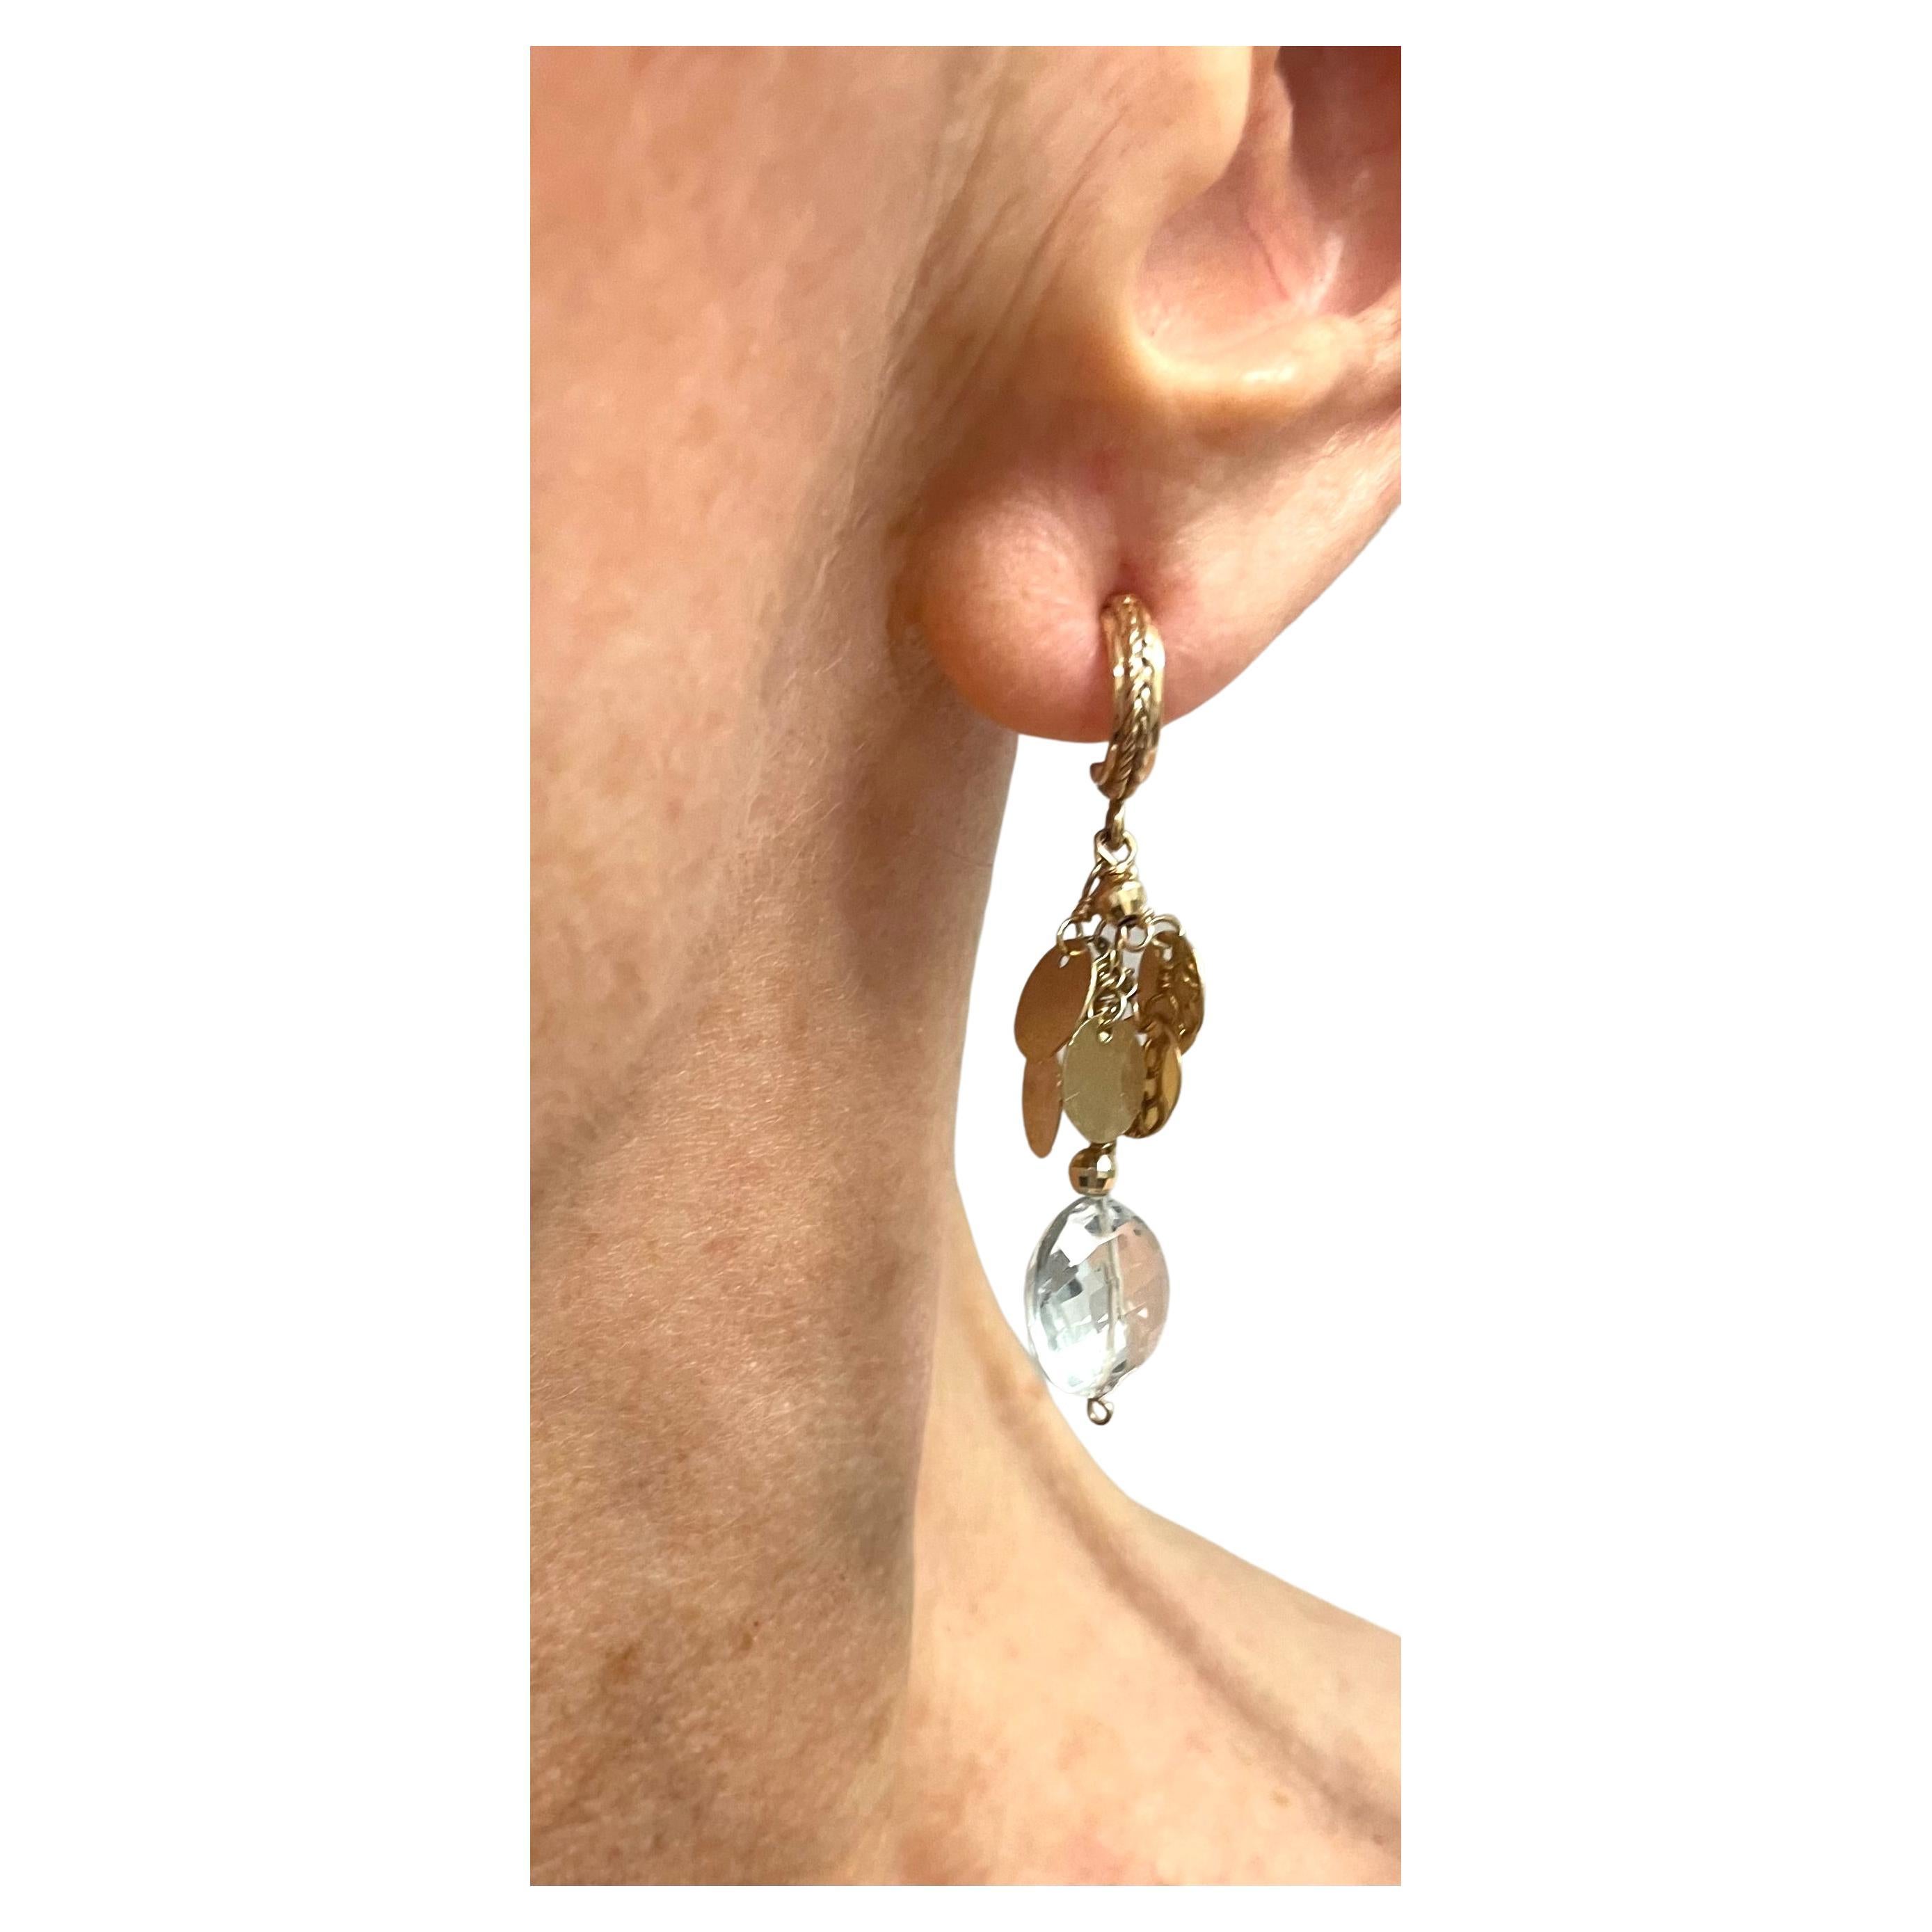 Description
These charming and feminine earrings are styled with 14k yellow gold discs and faceted balls which accentuates the beauty of the White Topaz dangling stones. The discs reflect light as they move creating an eye catching effect.
Item #